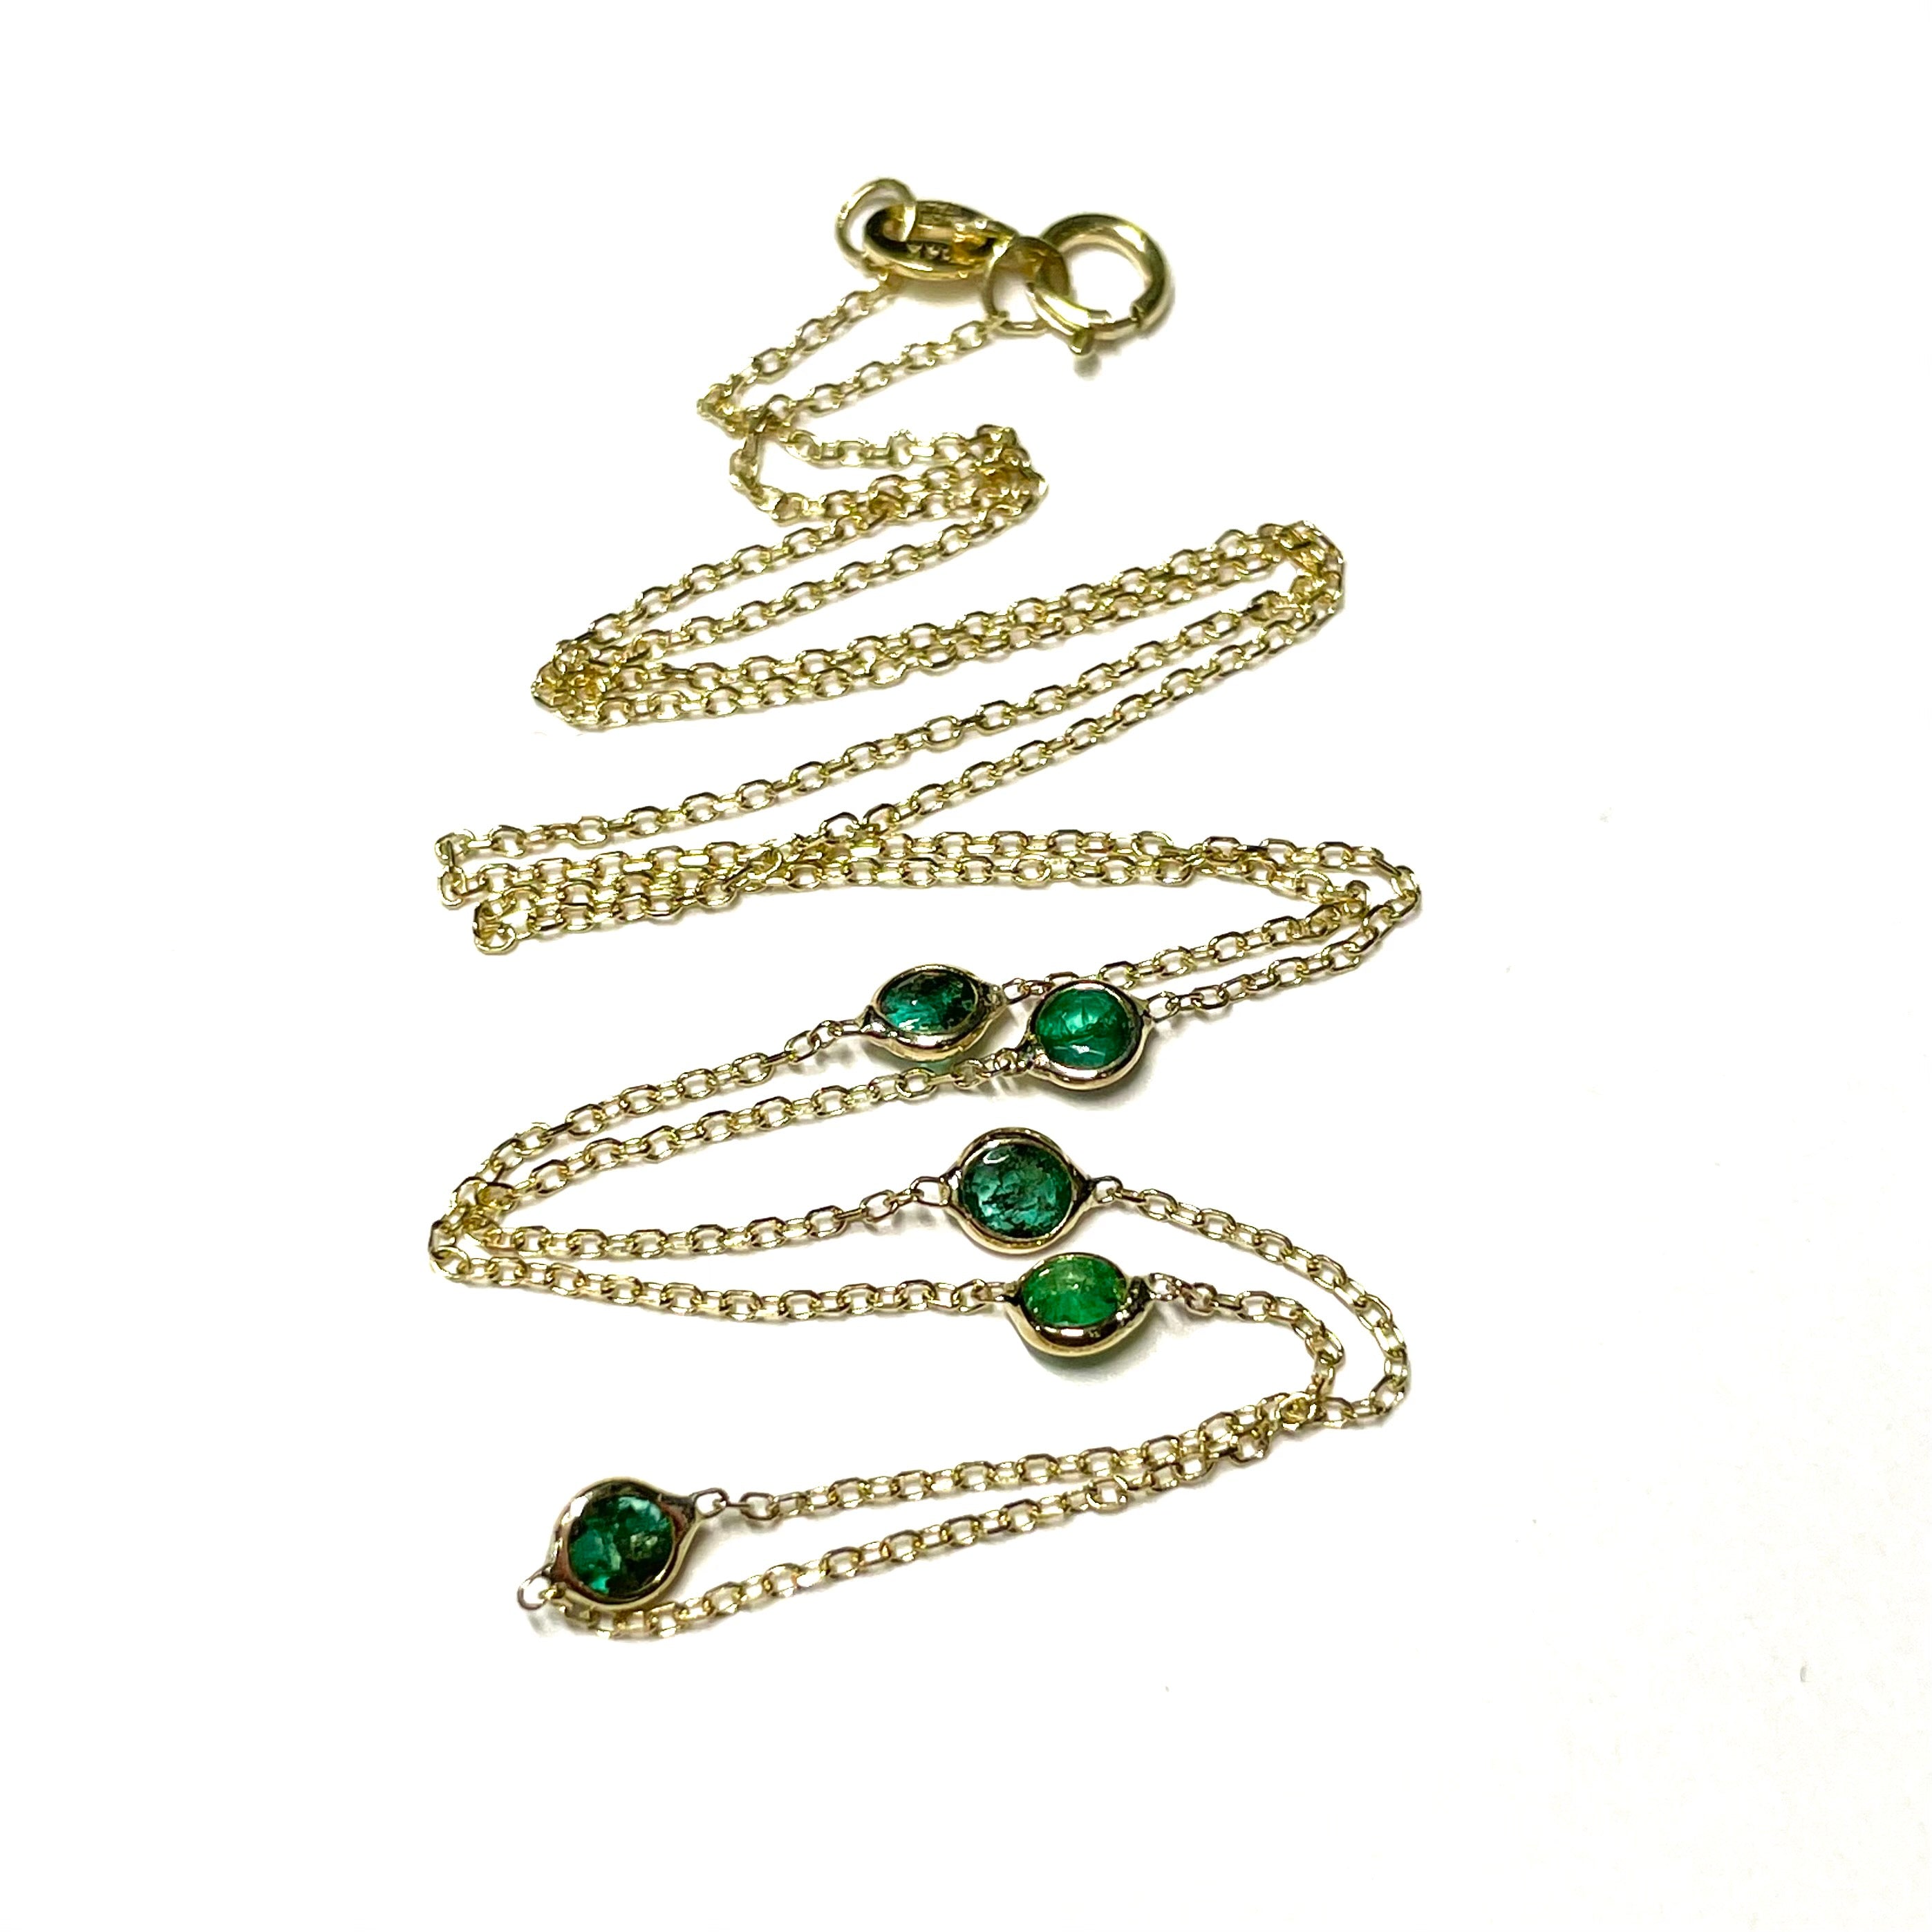 Five Round Emerald Necklace in Solid 14k Yellow Gold